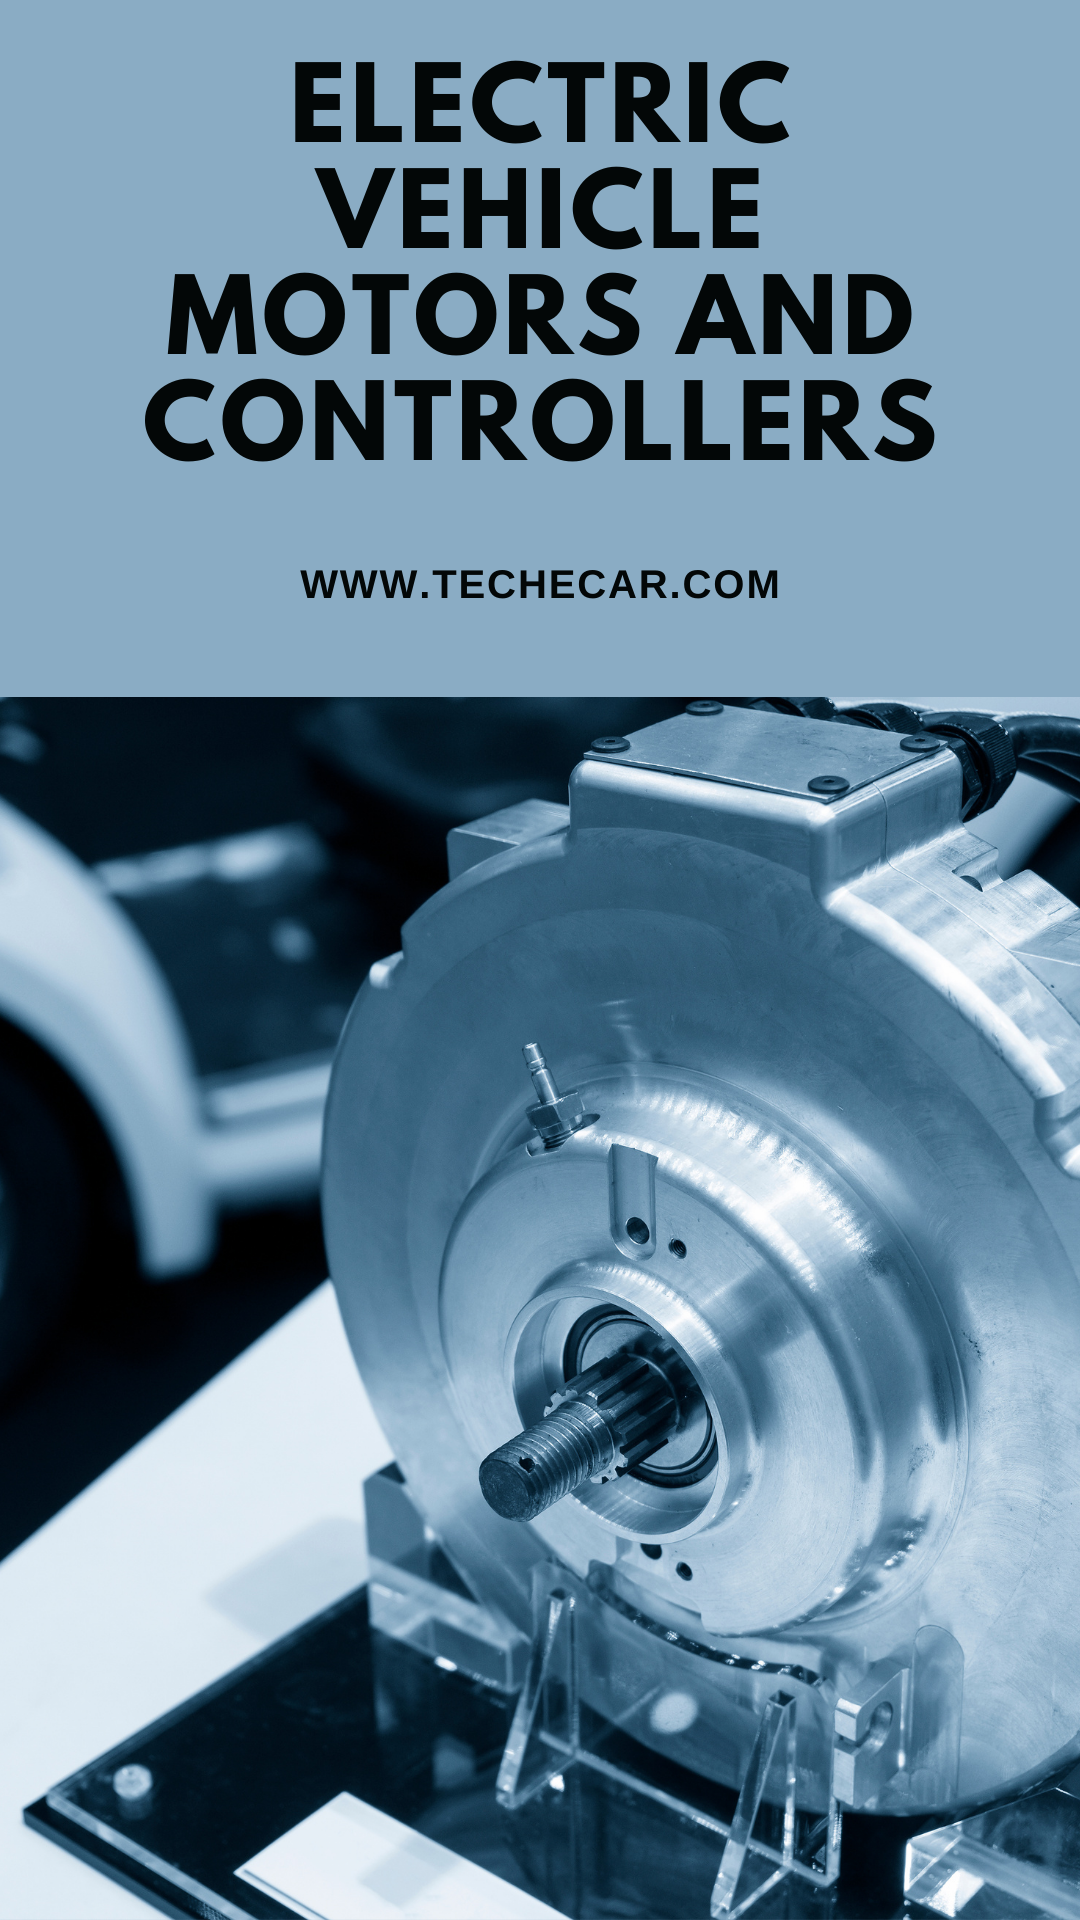 Electric Vehicle Motors And Controllers